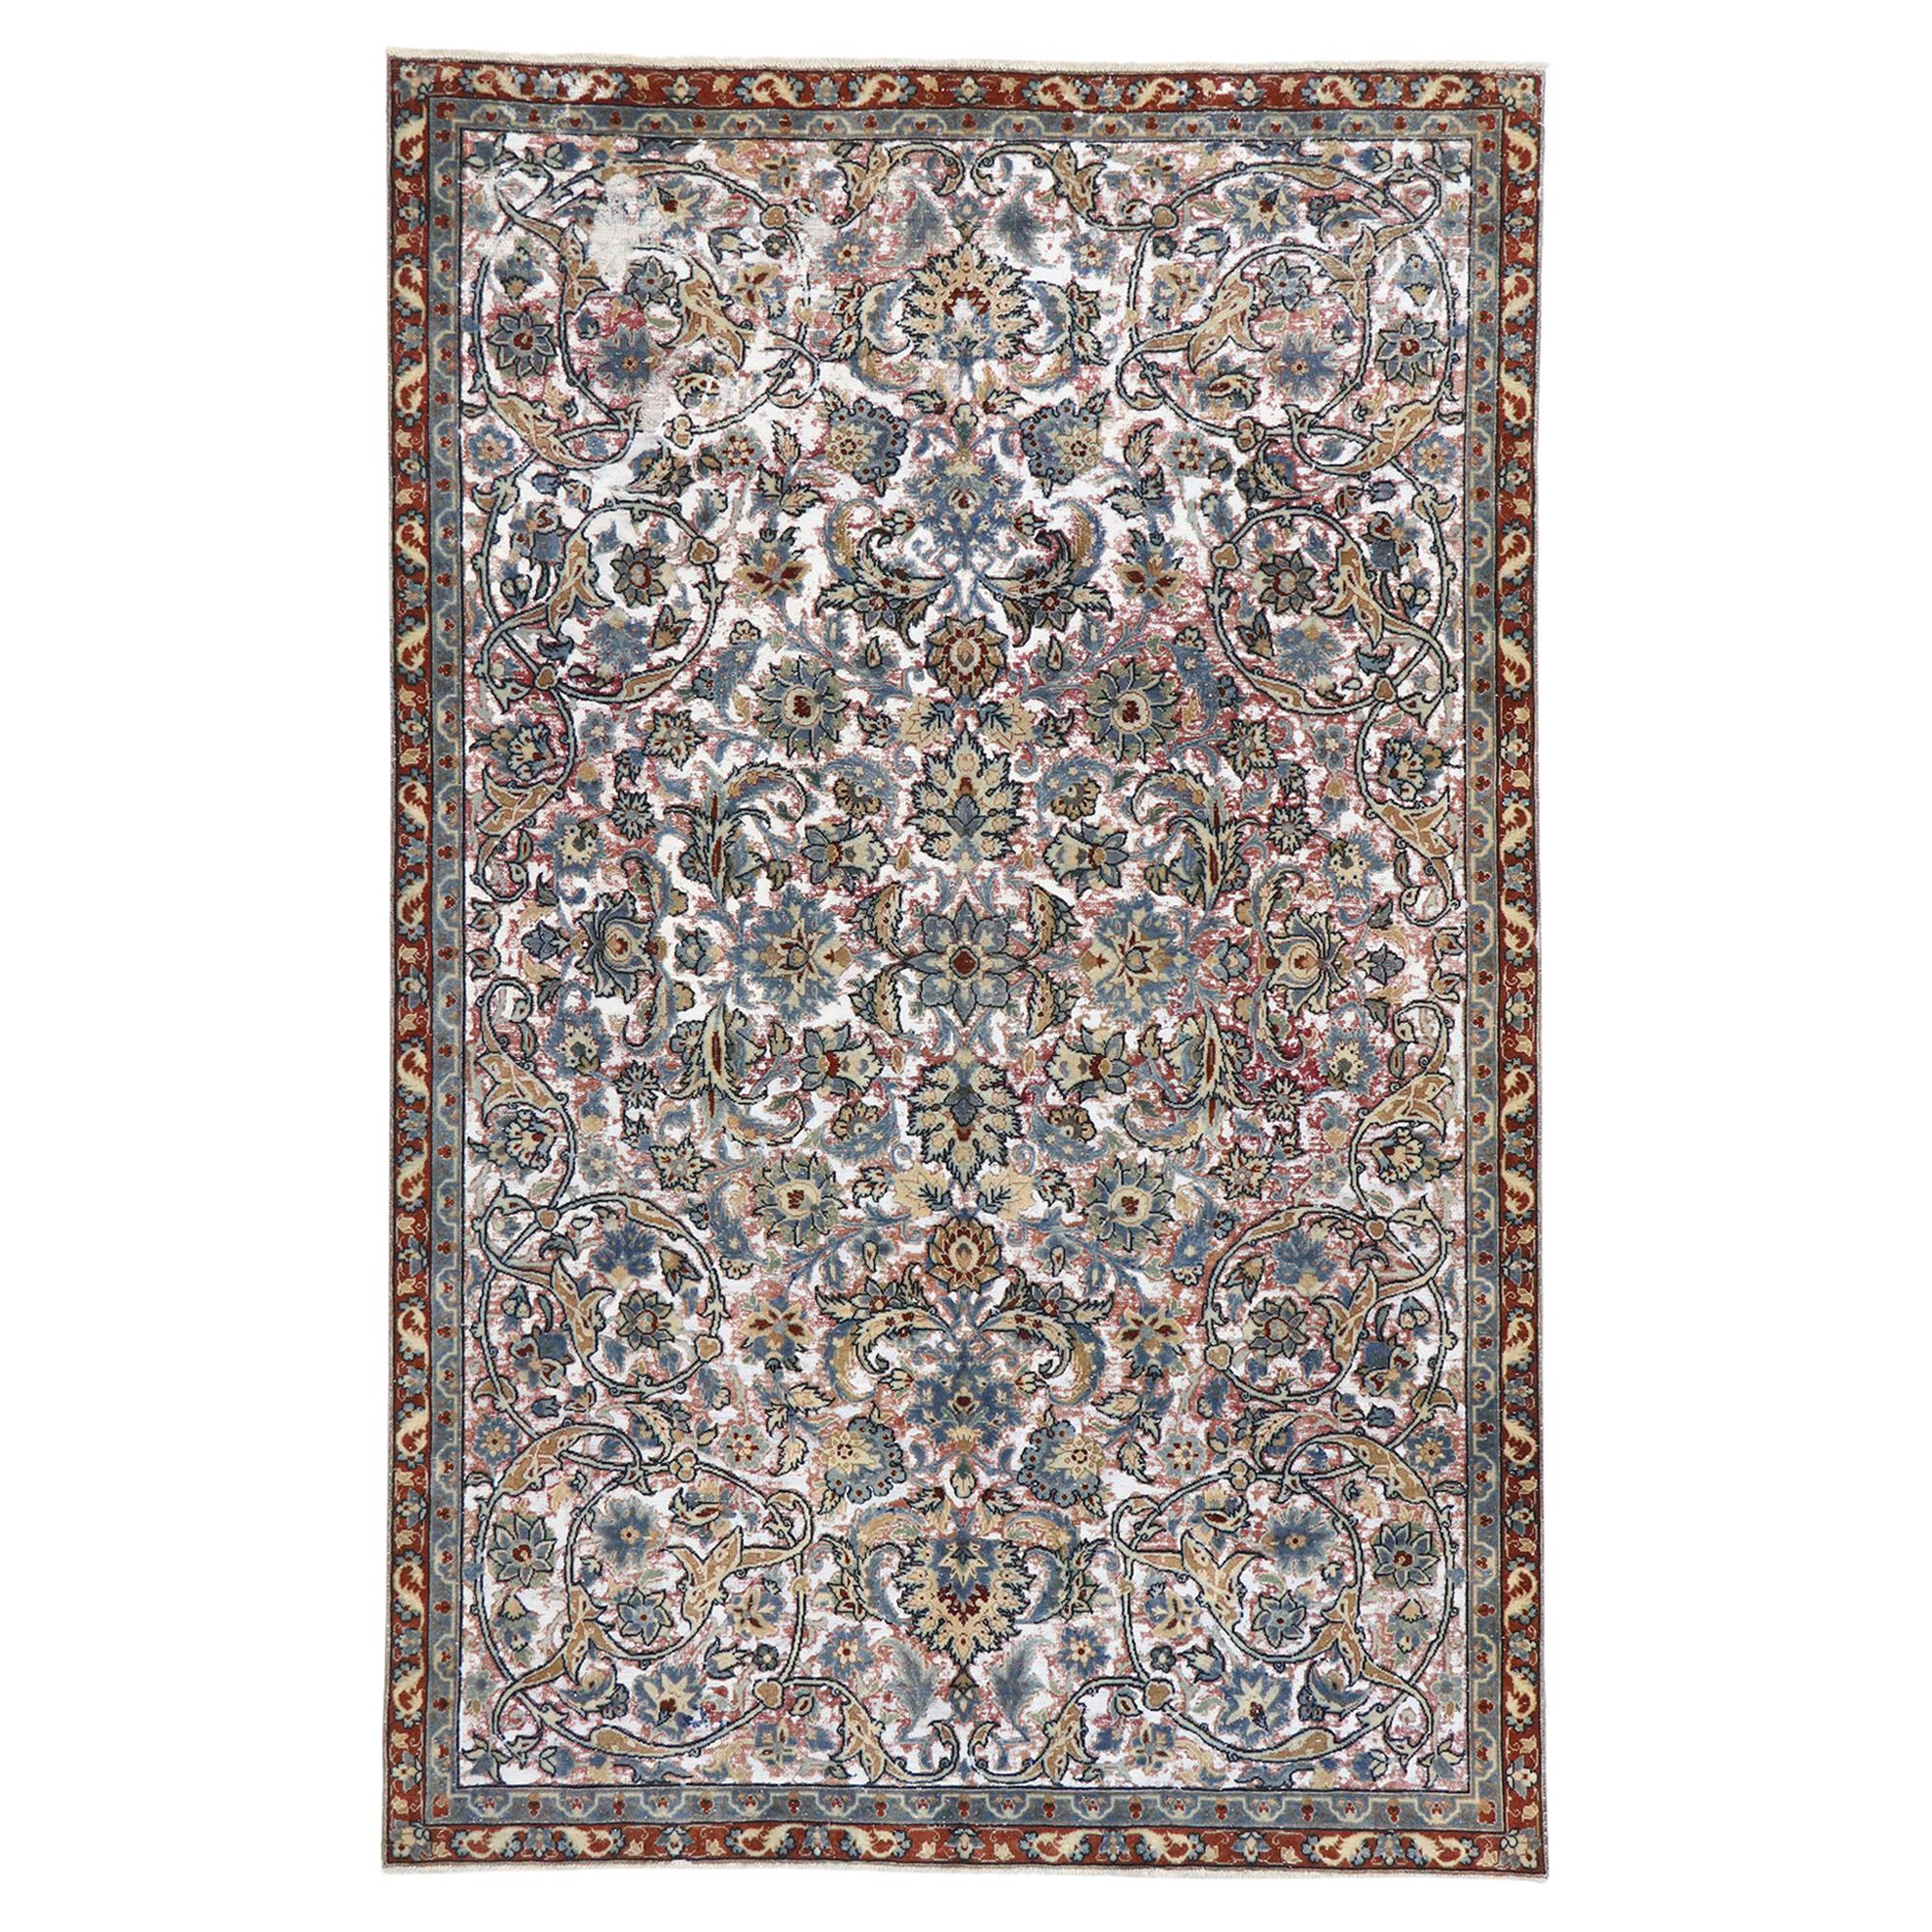 Distressed Antique Persian Tabriz Rug with Modern Rustic English Style For Sale